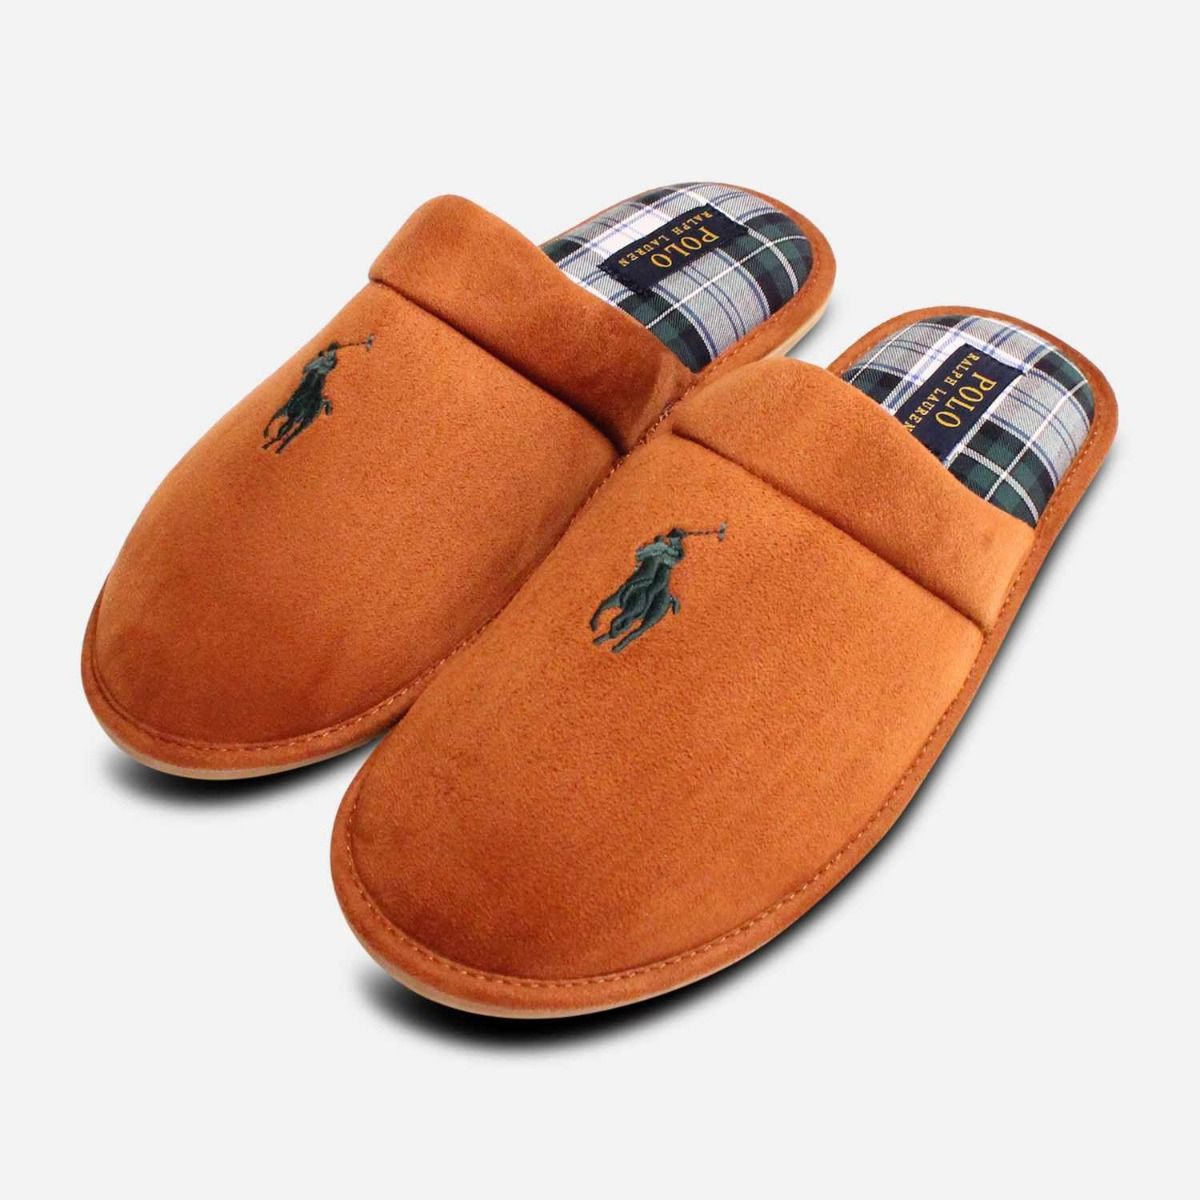 Polo Ralph Lauren slippers with polo hoodie bear in navy | ASOS